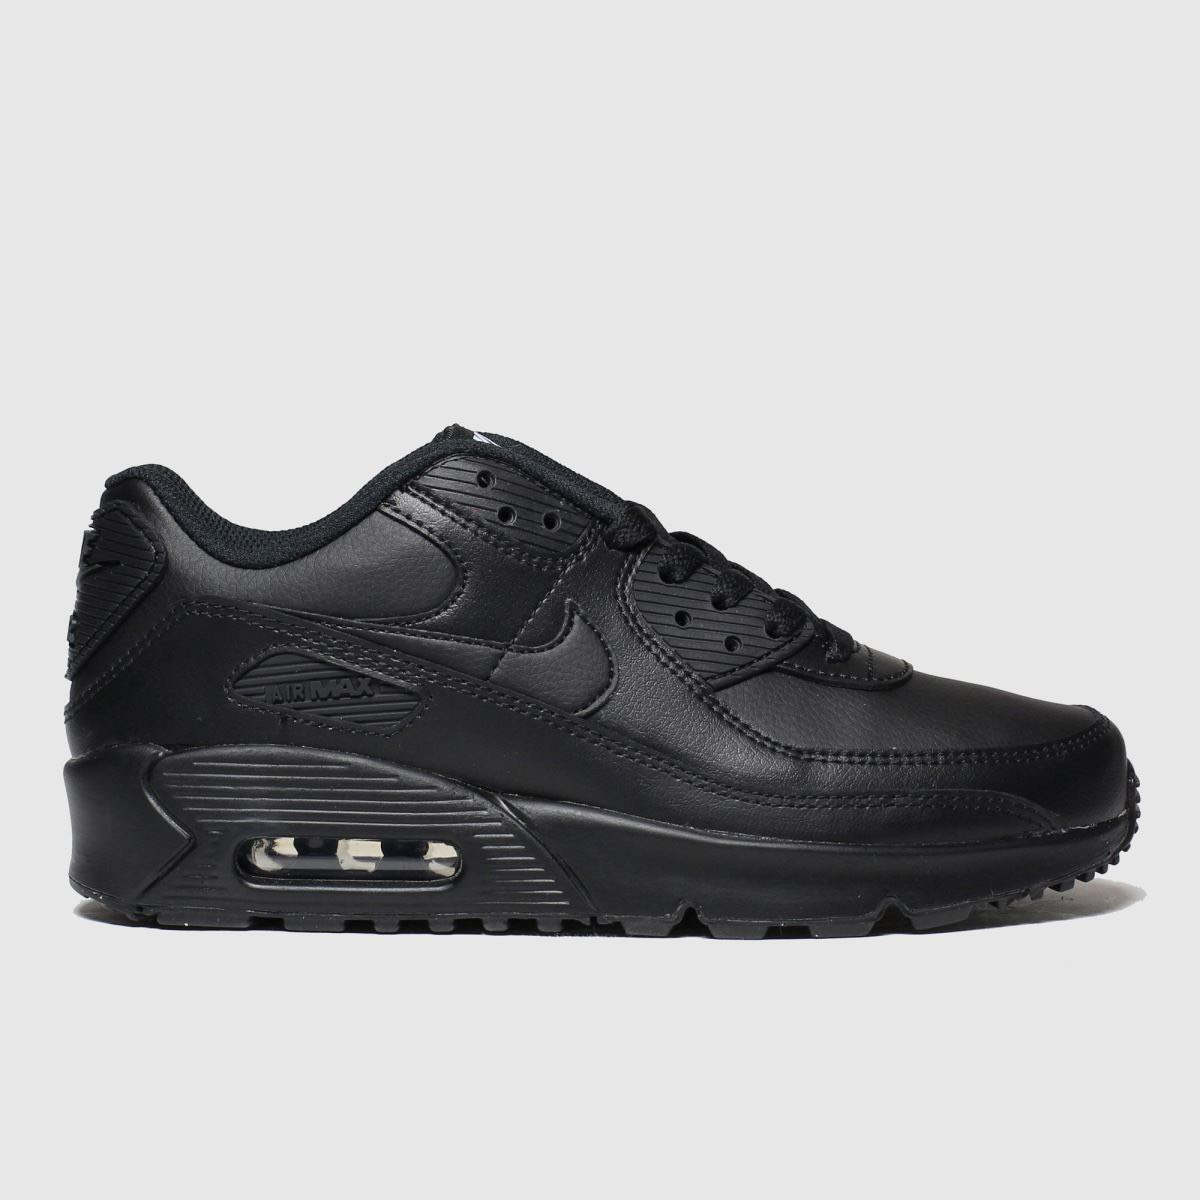 Nike black air max 90 ltr Youth Trainers